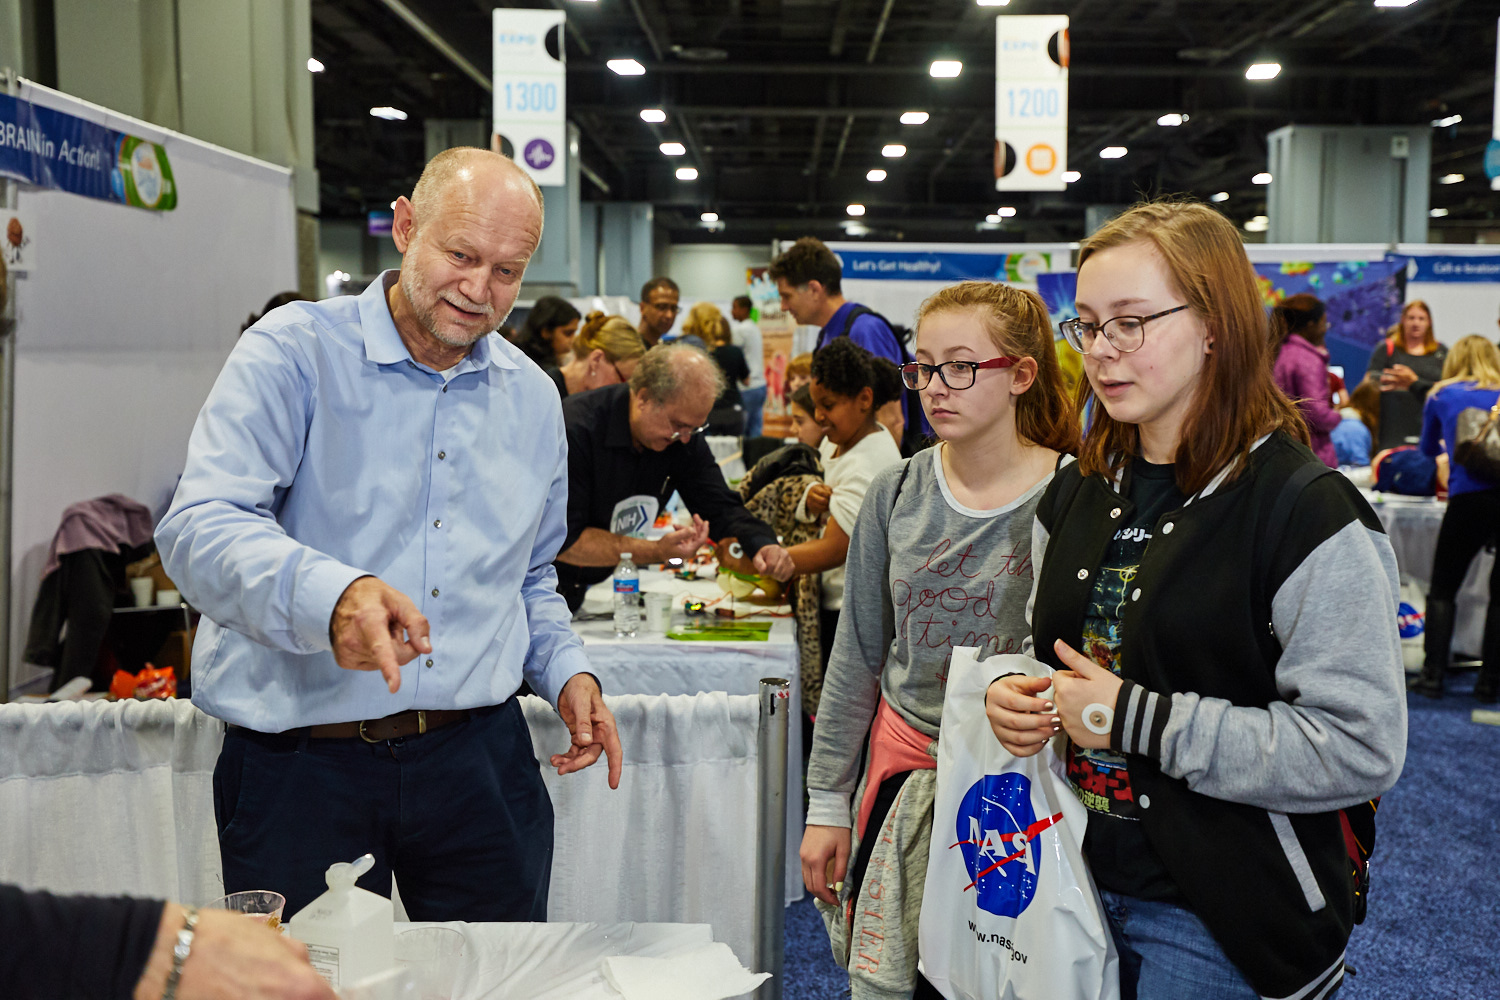 Max Muenke volunteers at the USA Science and Engineering Festival